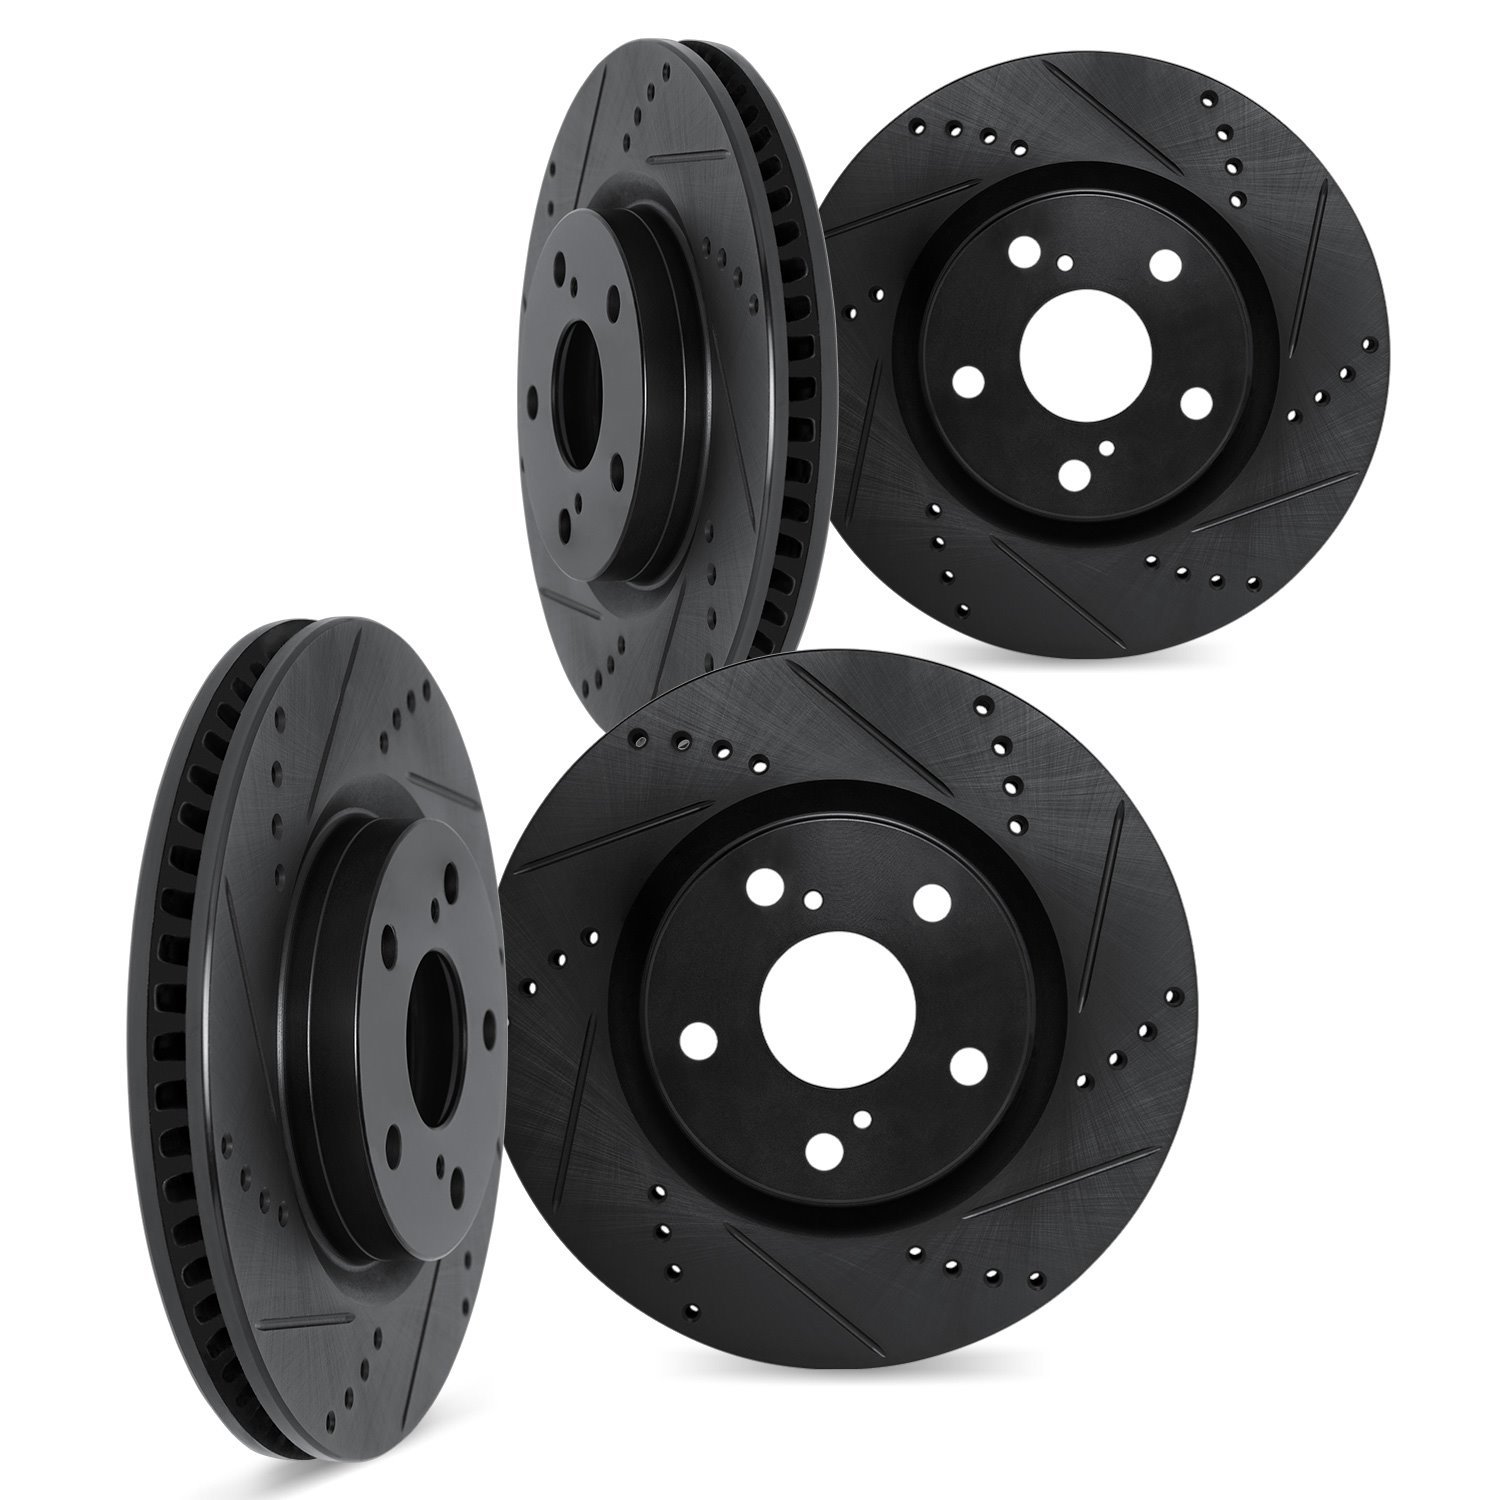 8004-31097 Drilled/Slotted Brake Rotors [Black], 2008-2019 BMW, Position: Front and Rear